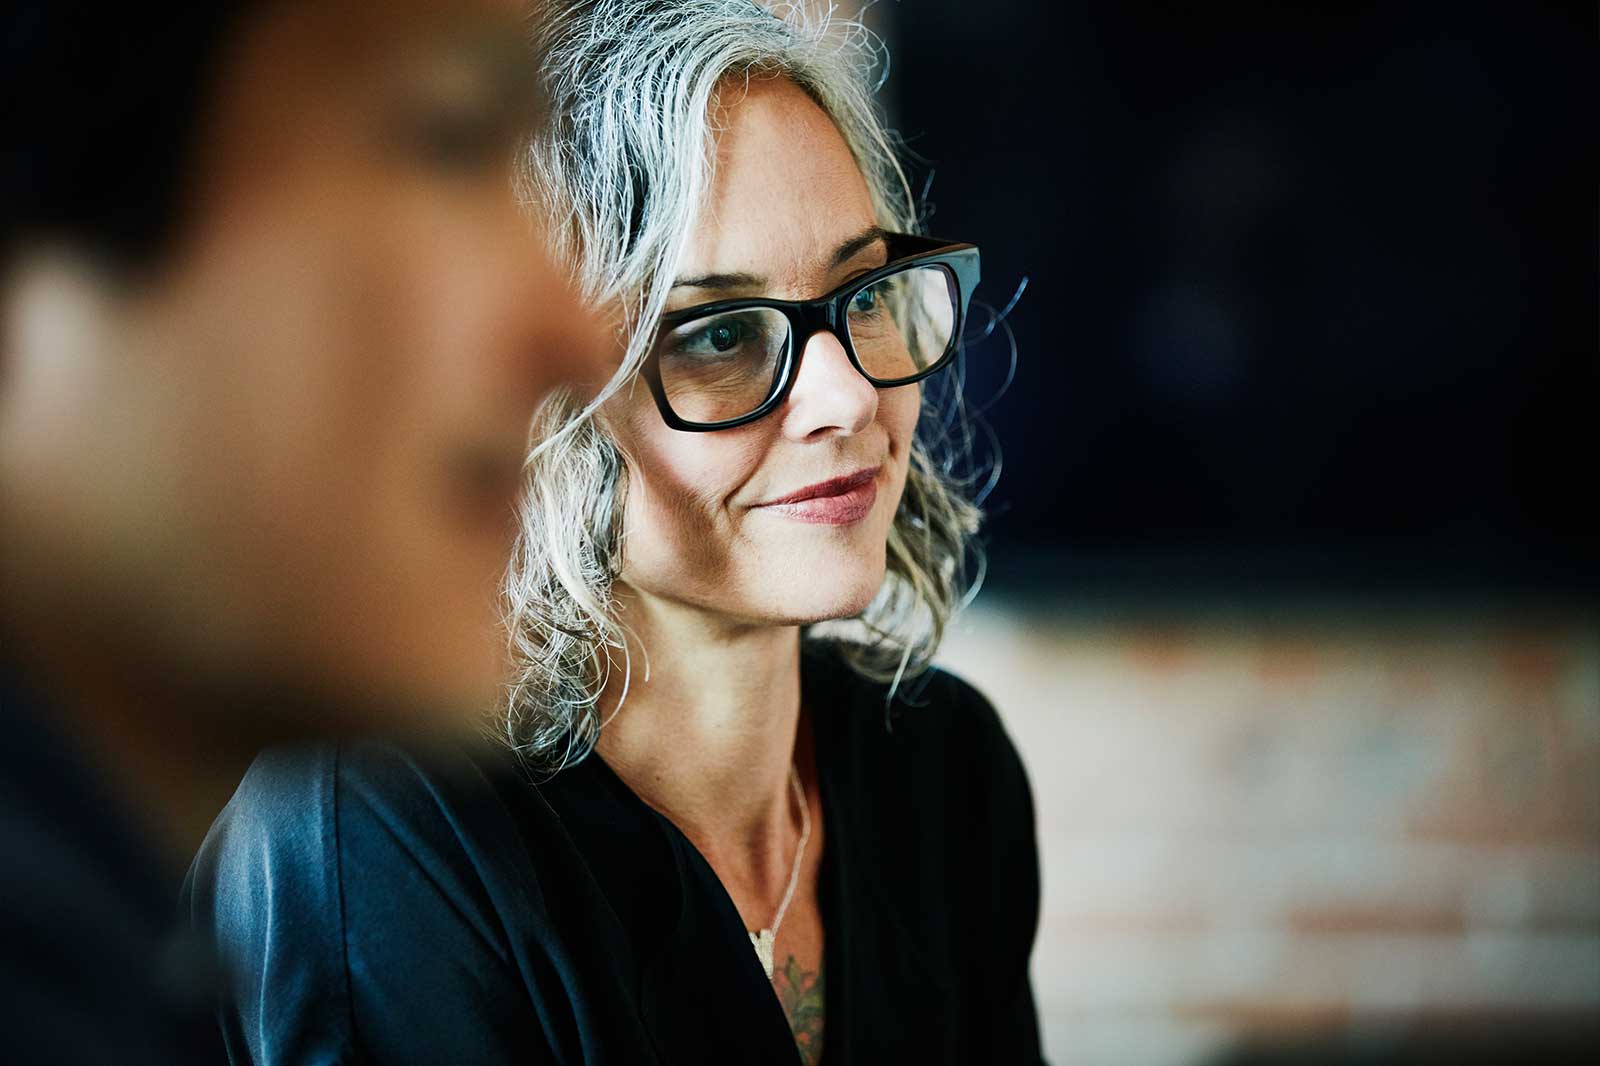 Smiling woman with striking glasses listens